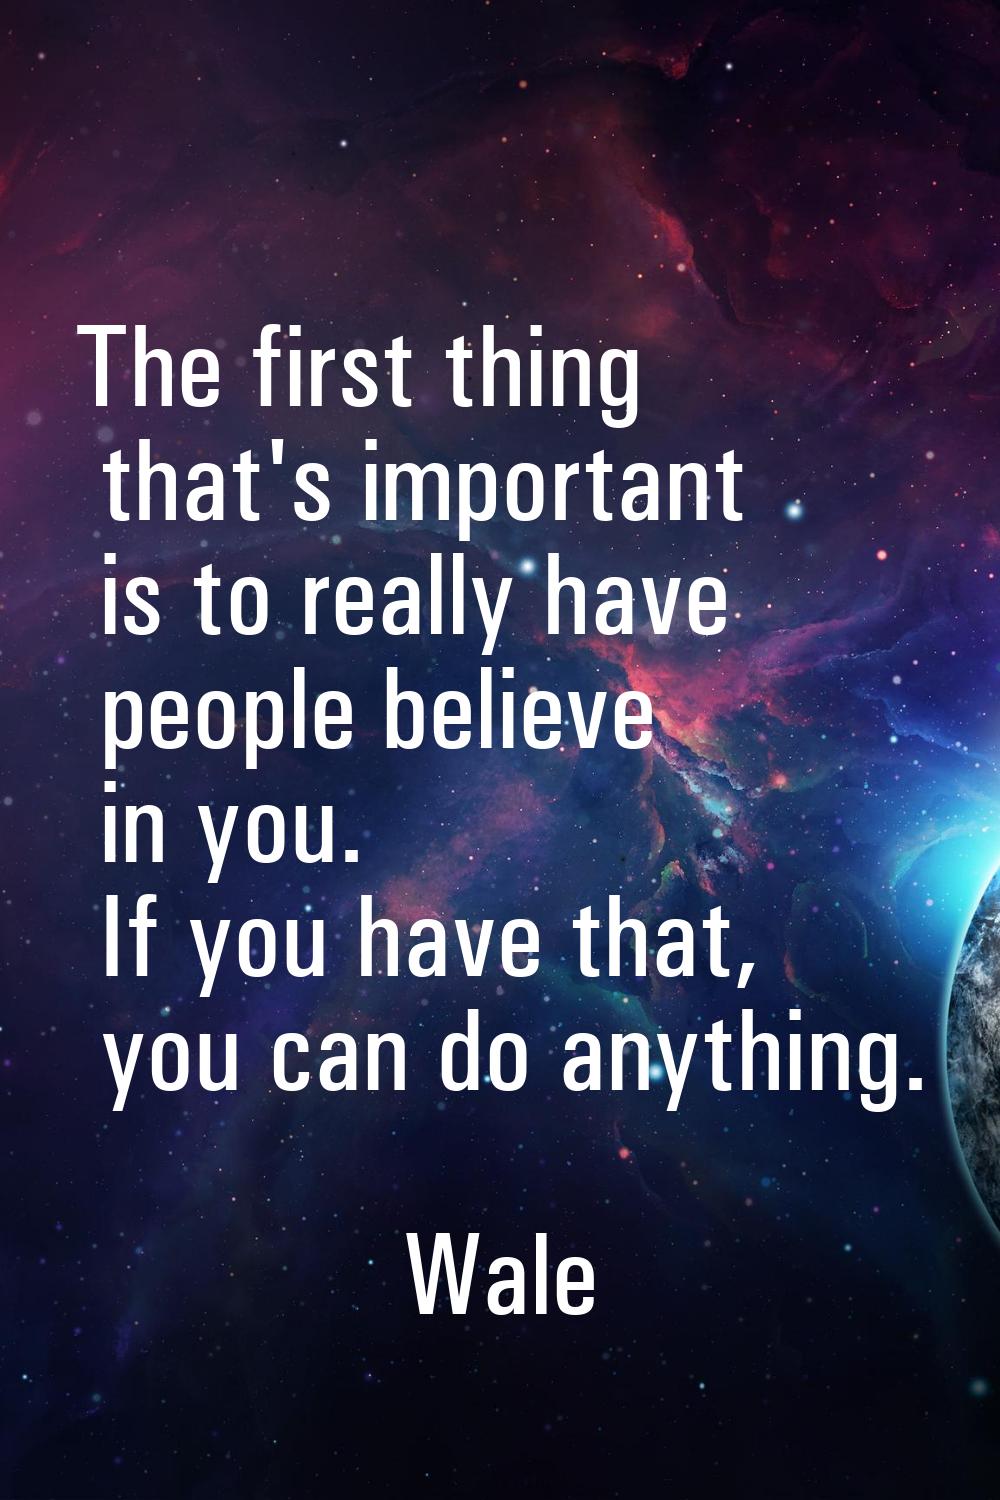 The first thing that's important is to really have people believe in you. If you have that, you can